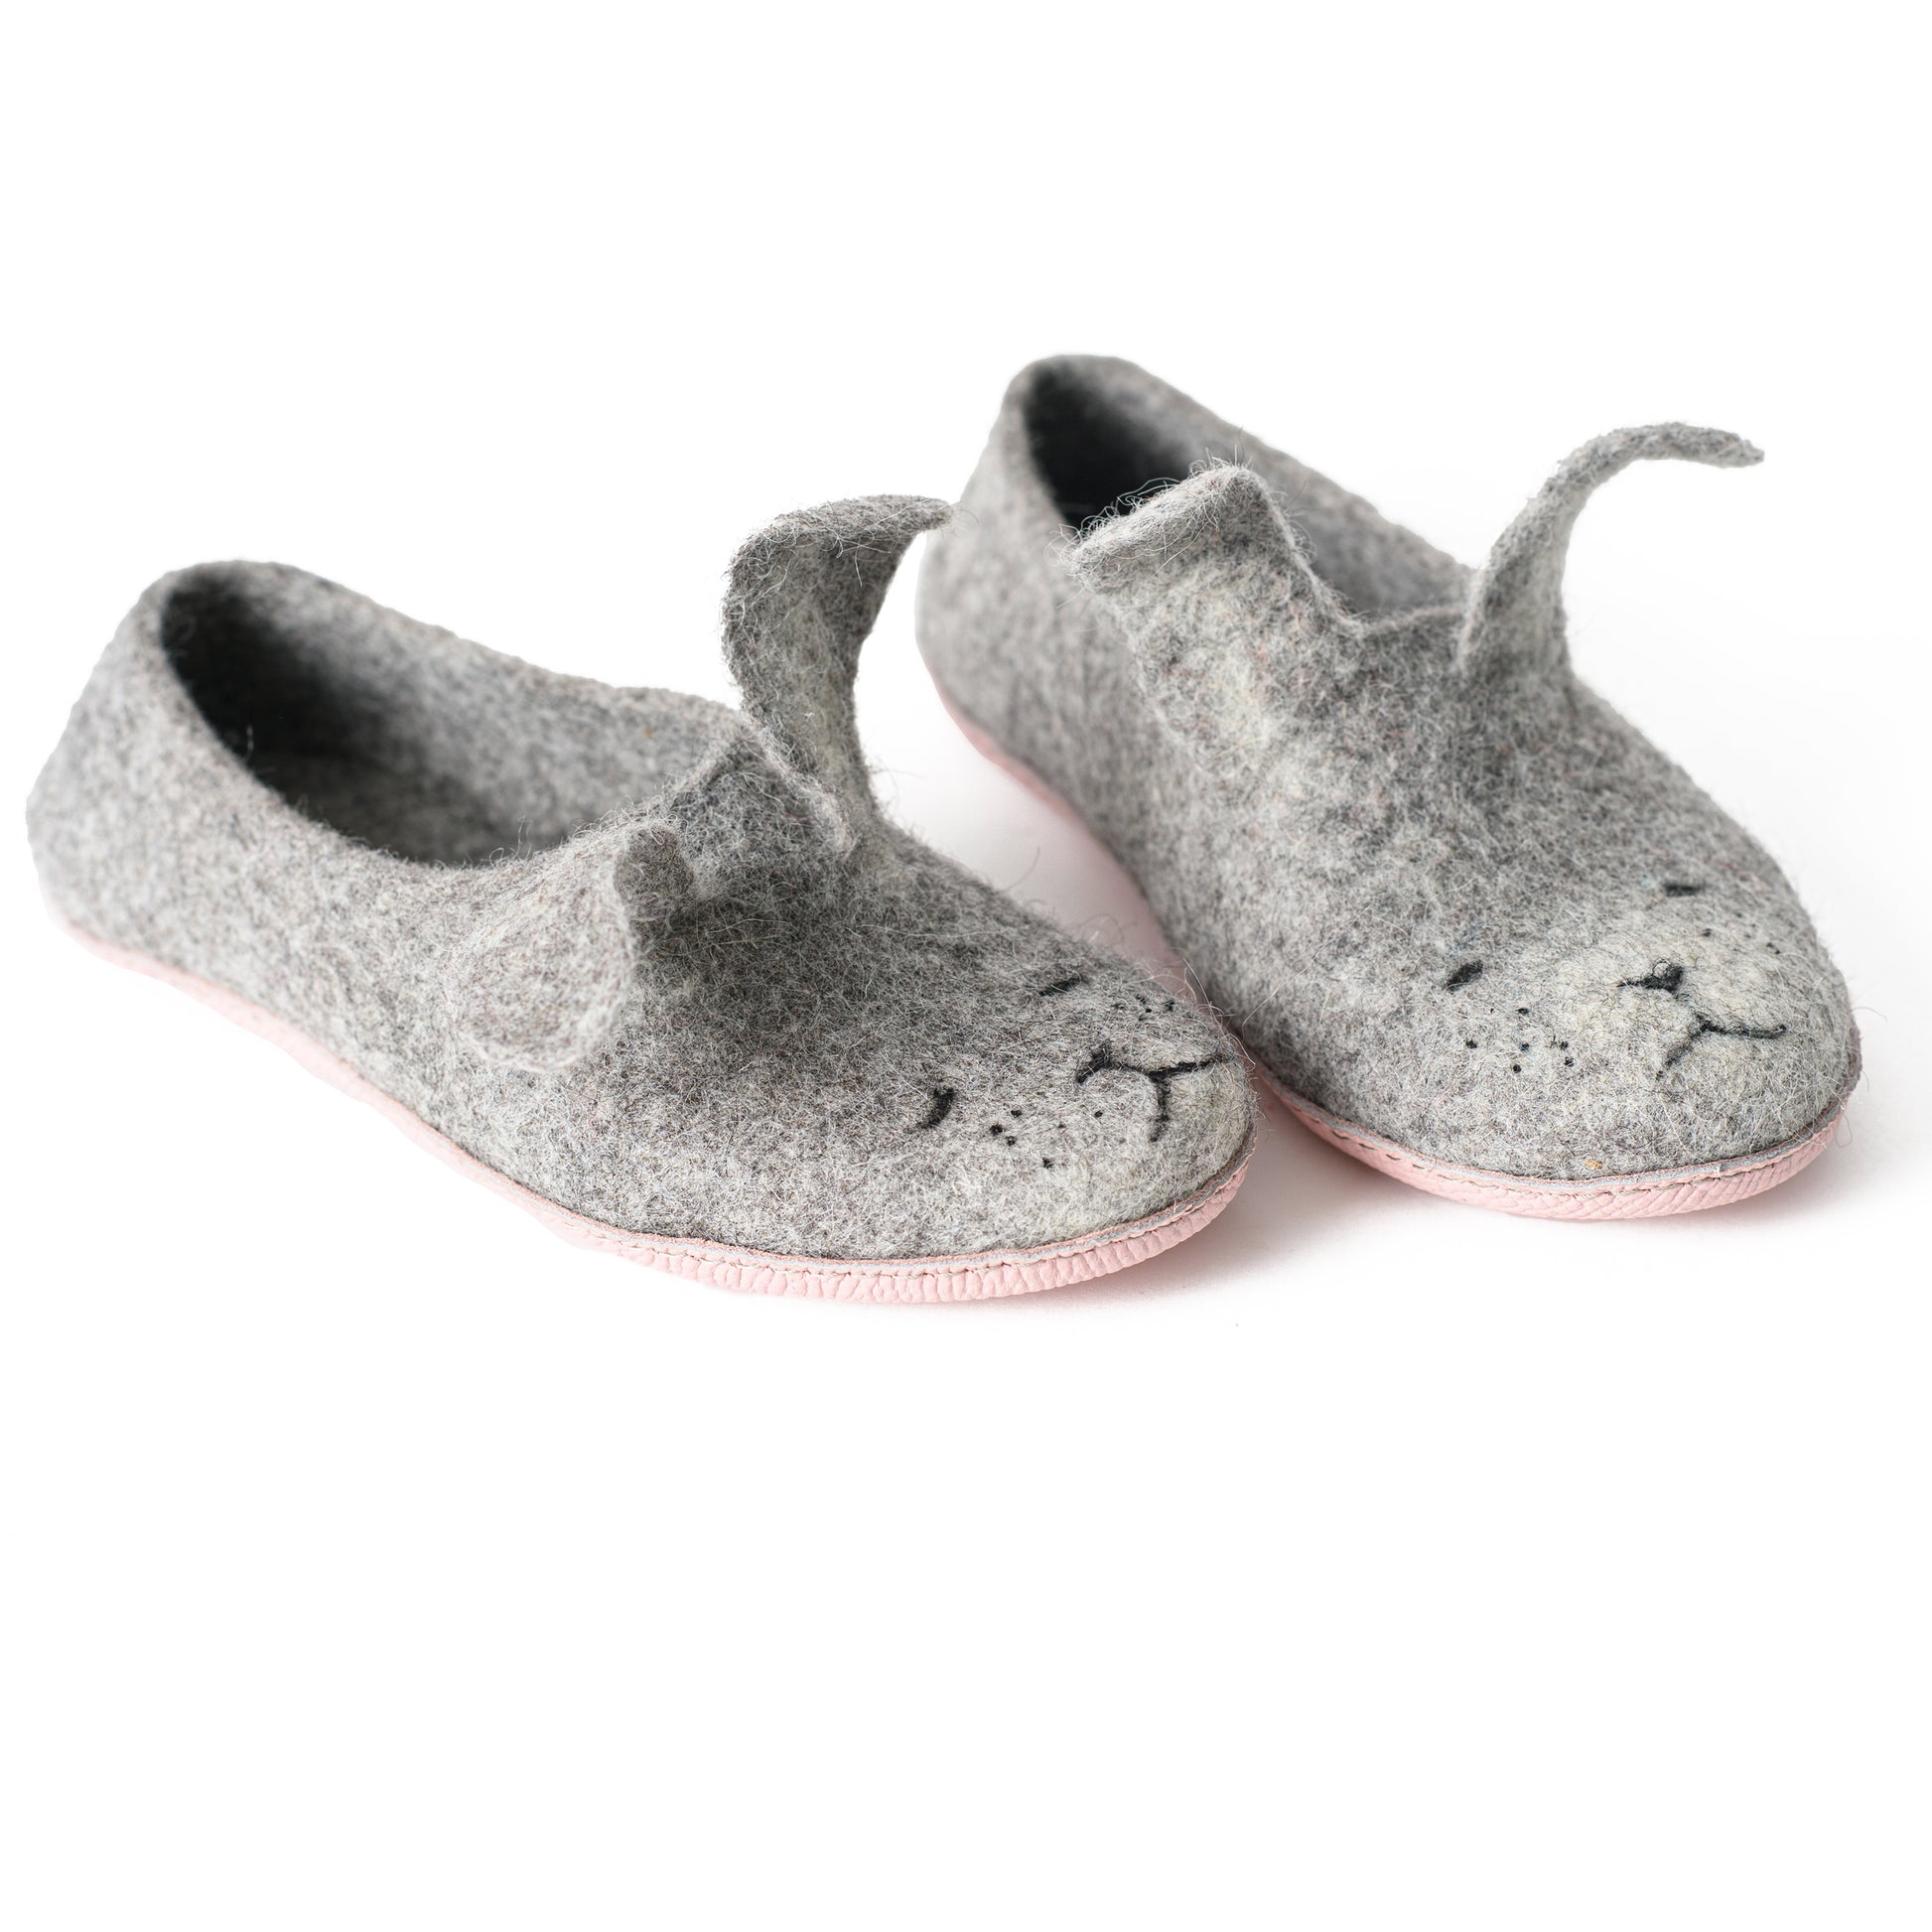 [felted_slippers],[wool_slippers], [burebure_slippers], [warm_wool_slippers], Grey Bunny Slippers Youth (Eu 30/39), BureBure shoes and slippers